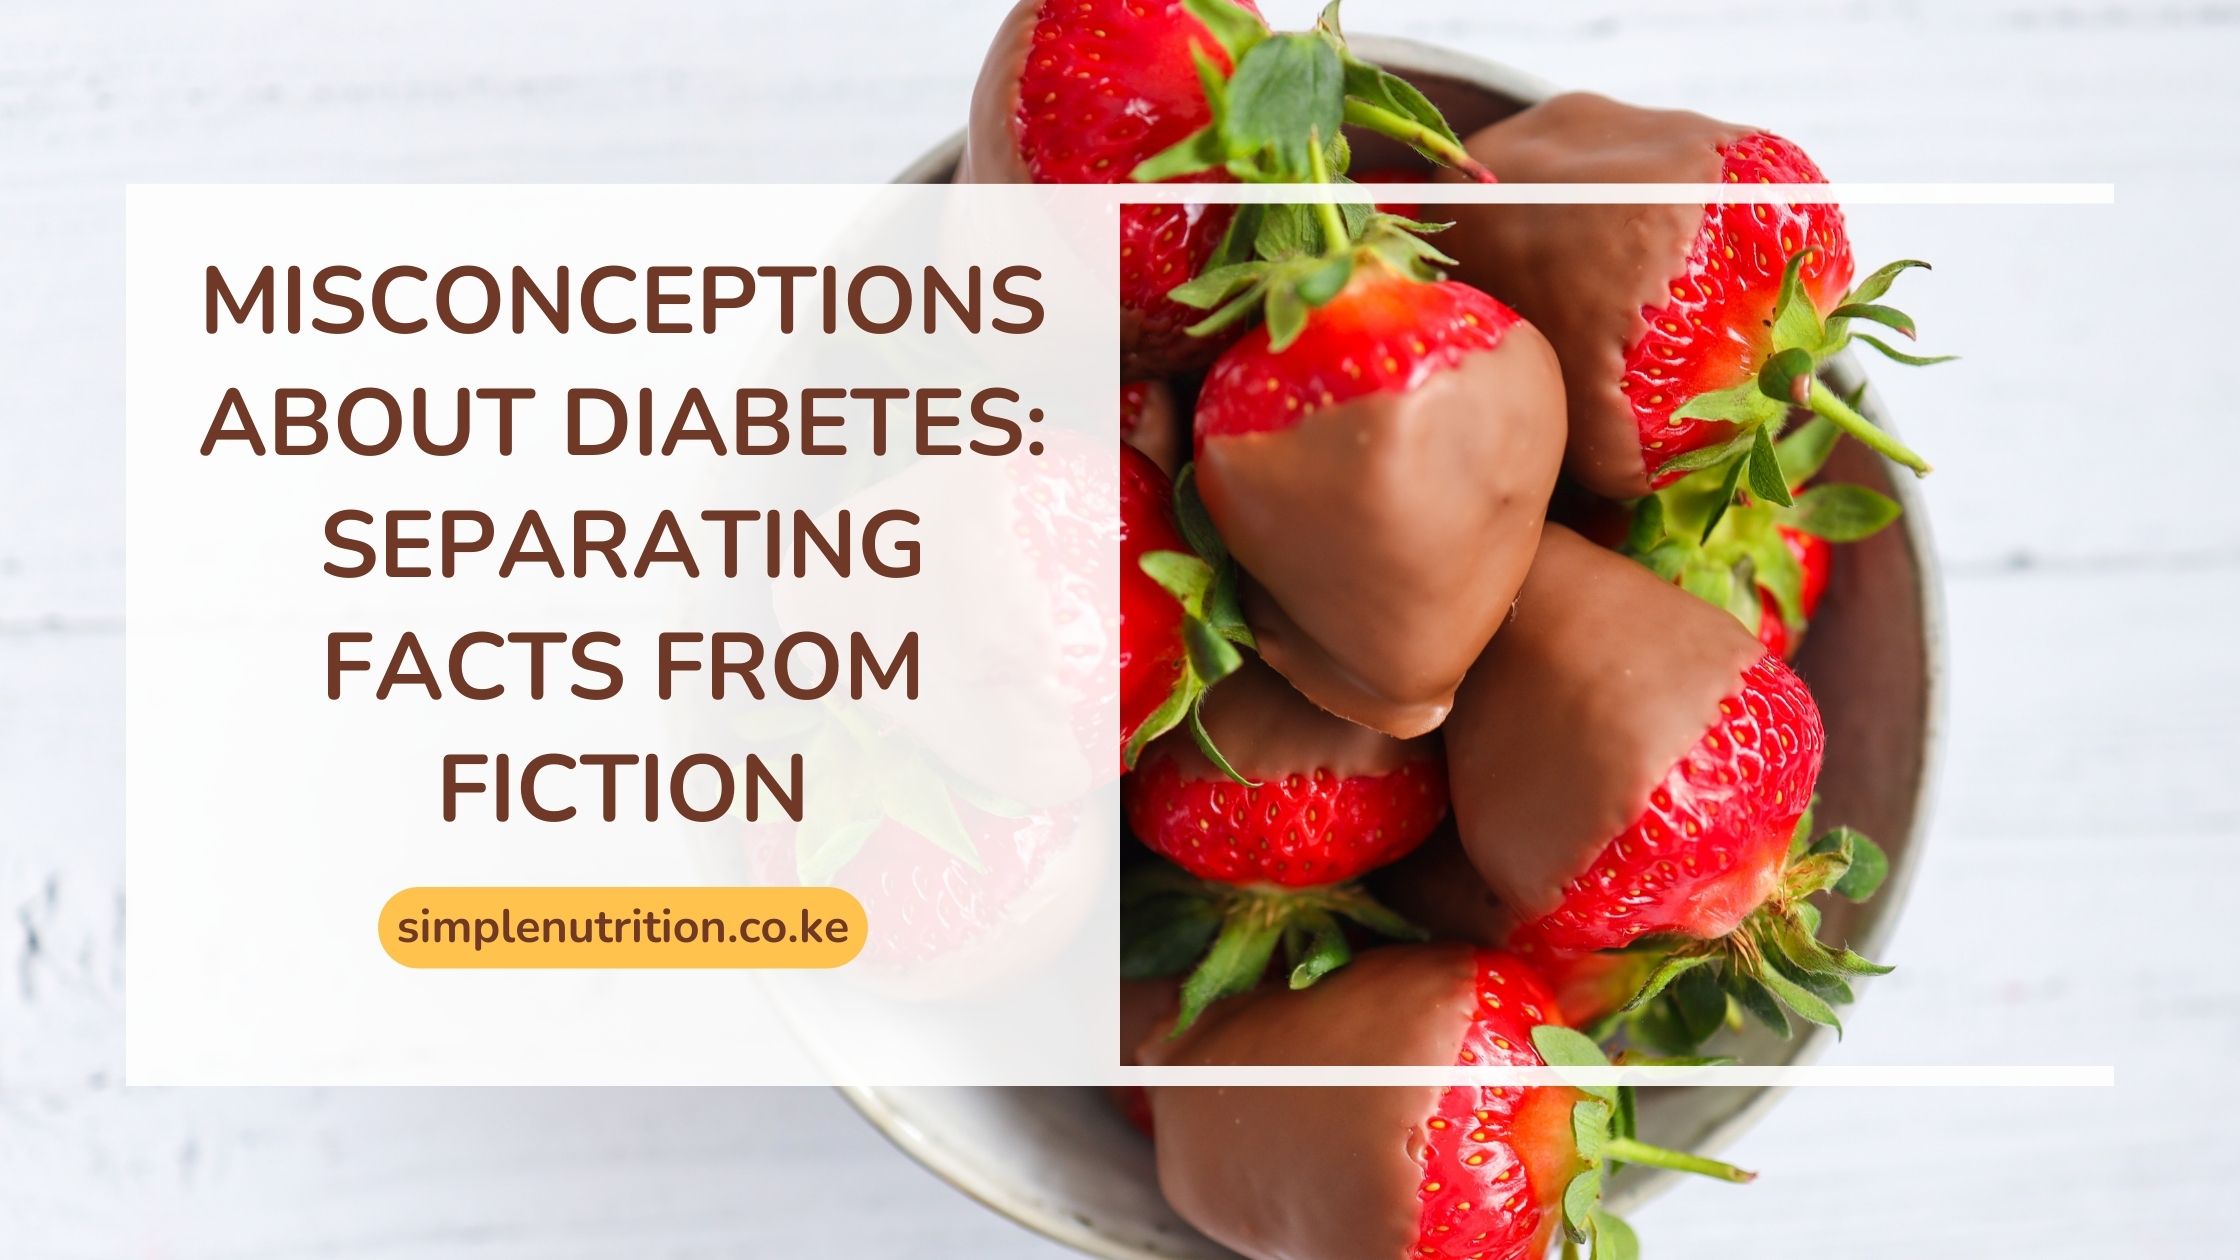 Misconceptions about Diabetes: Separating Facts from Fiction